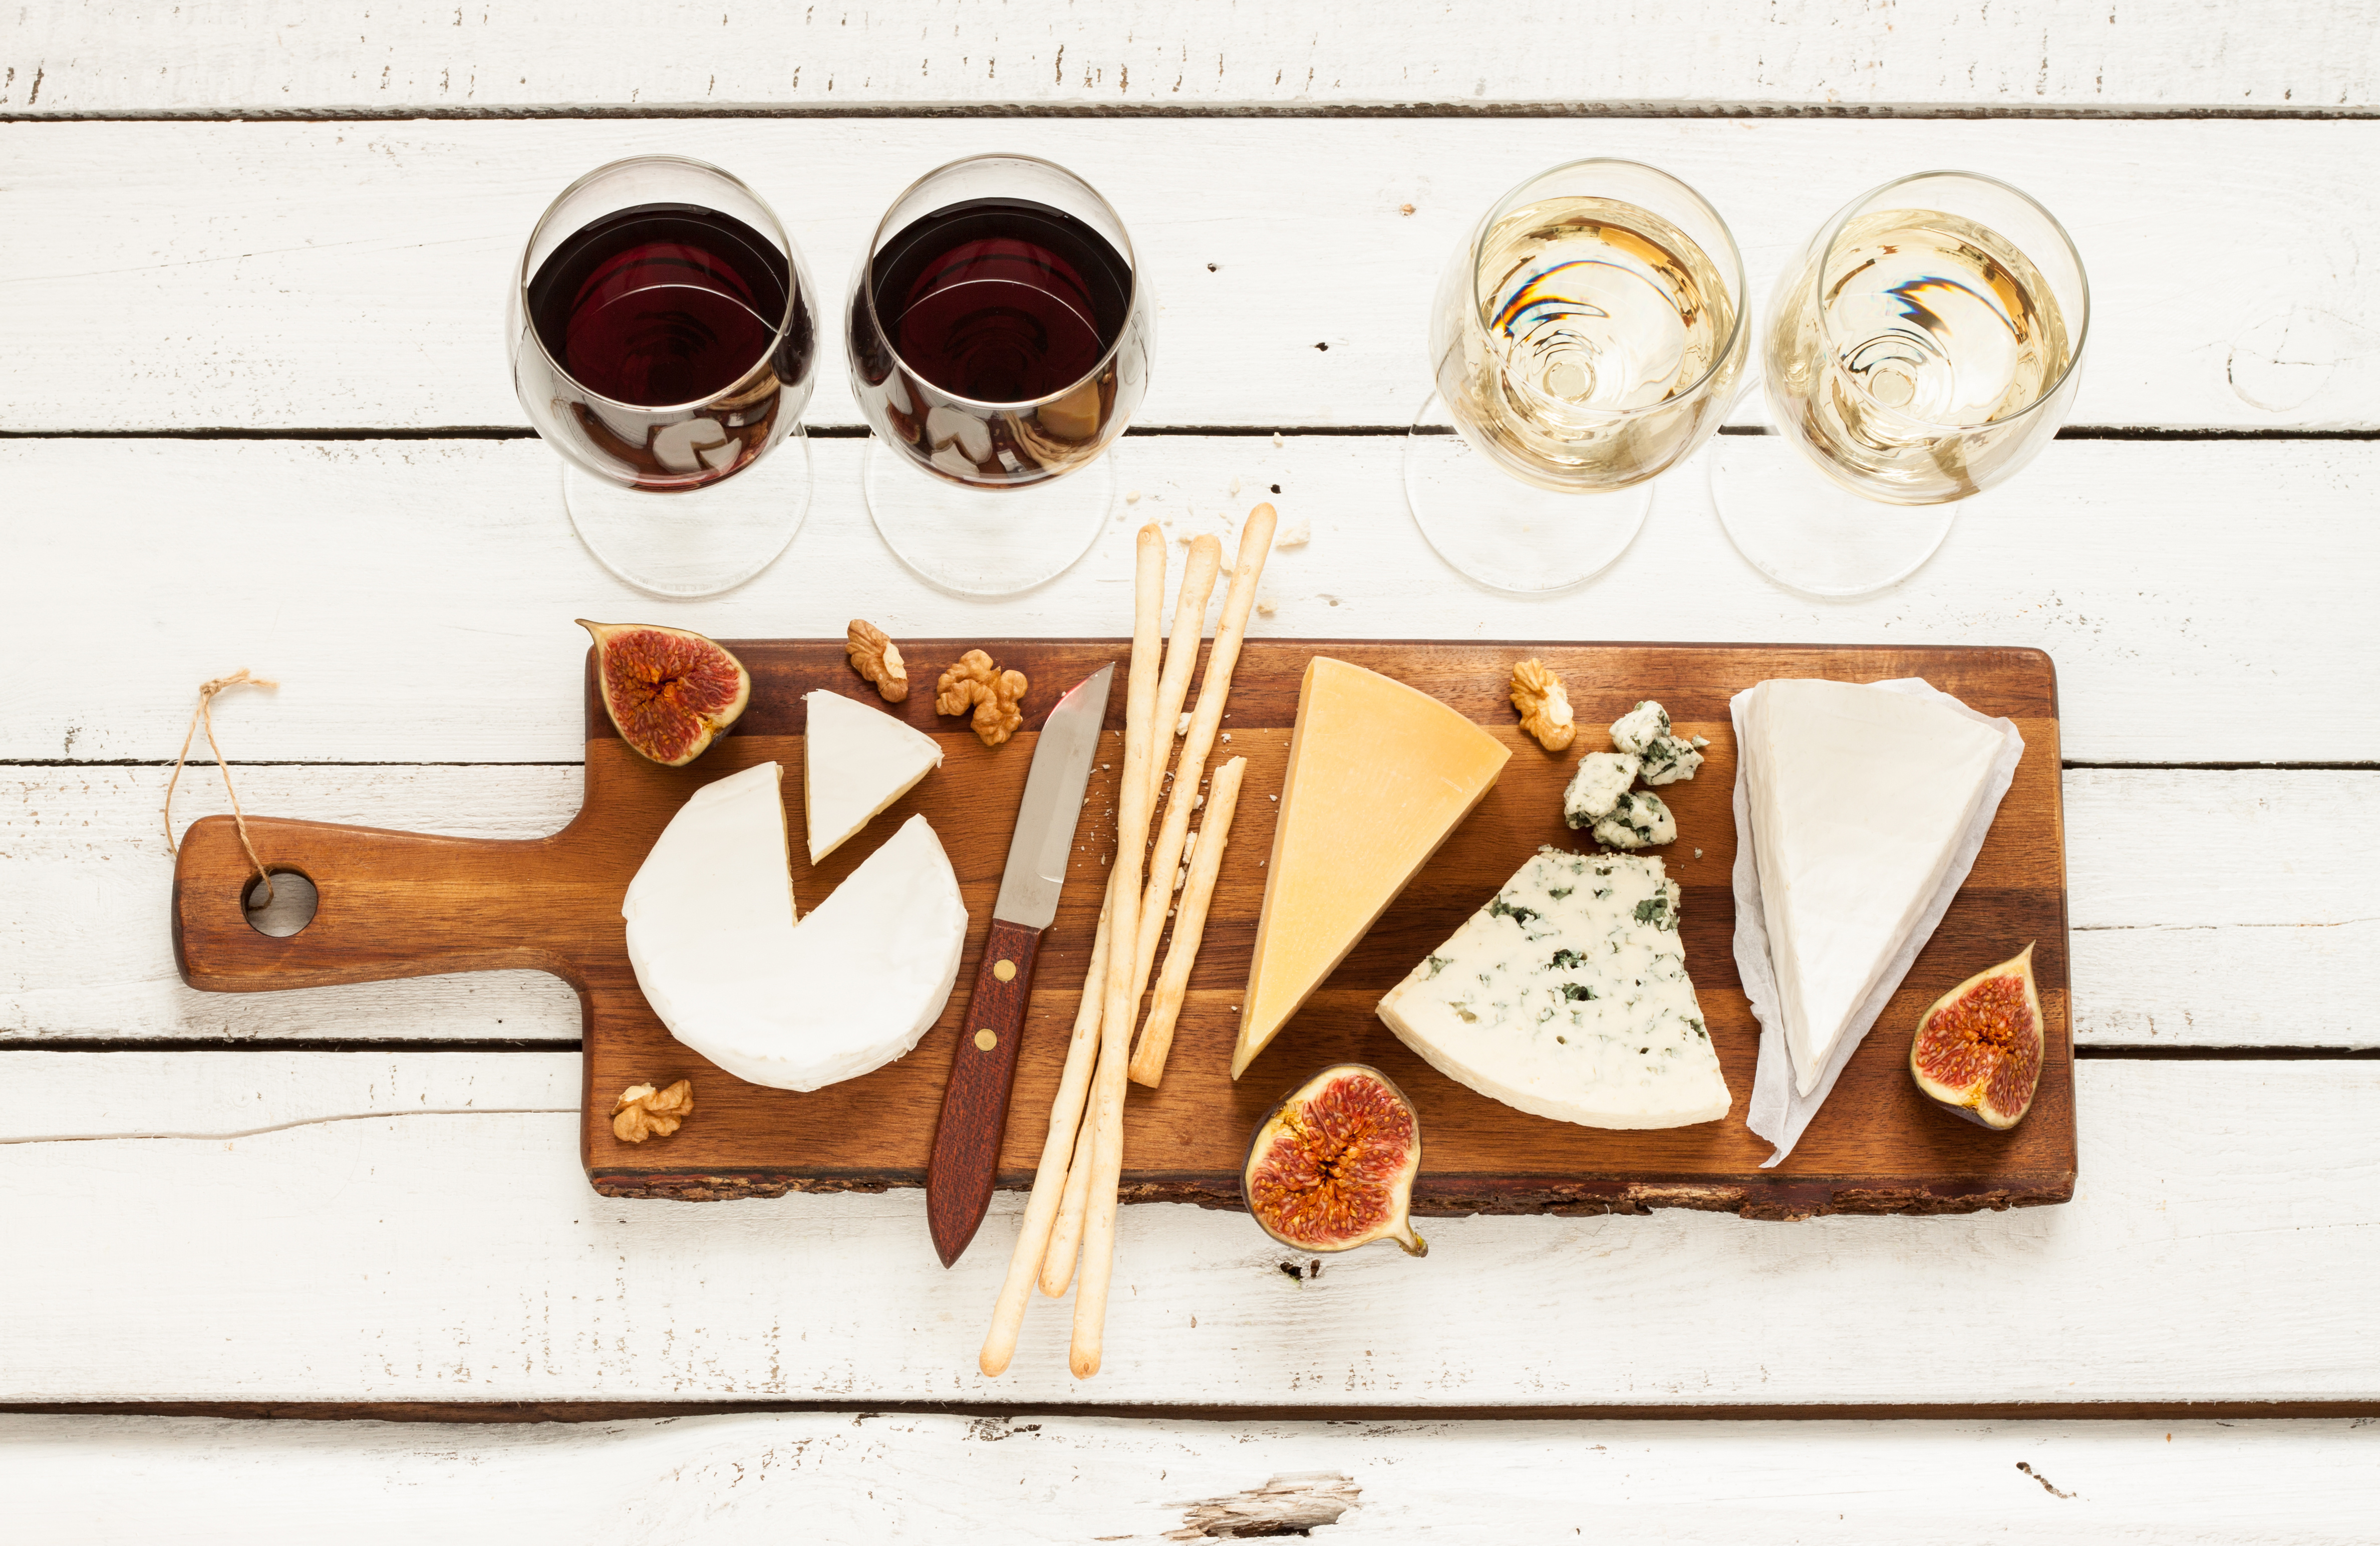 Red and white wine plus different kinds of cheeses (cheeseboard) on rustic wooden table